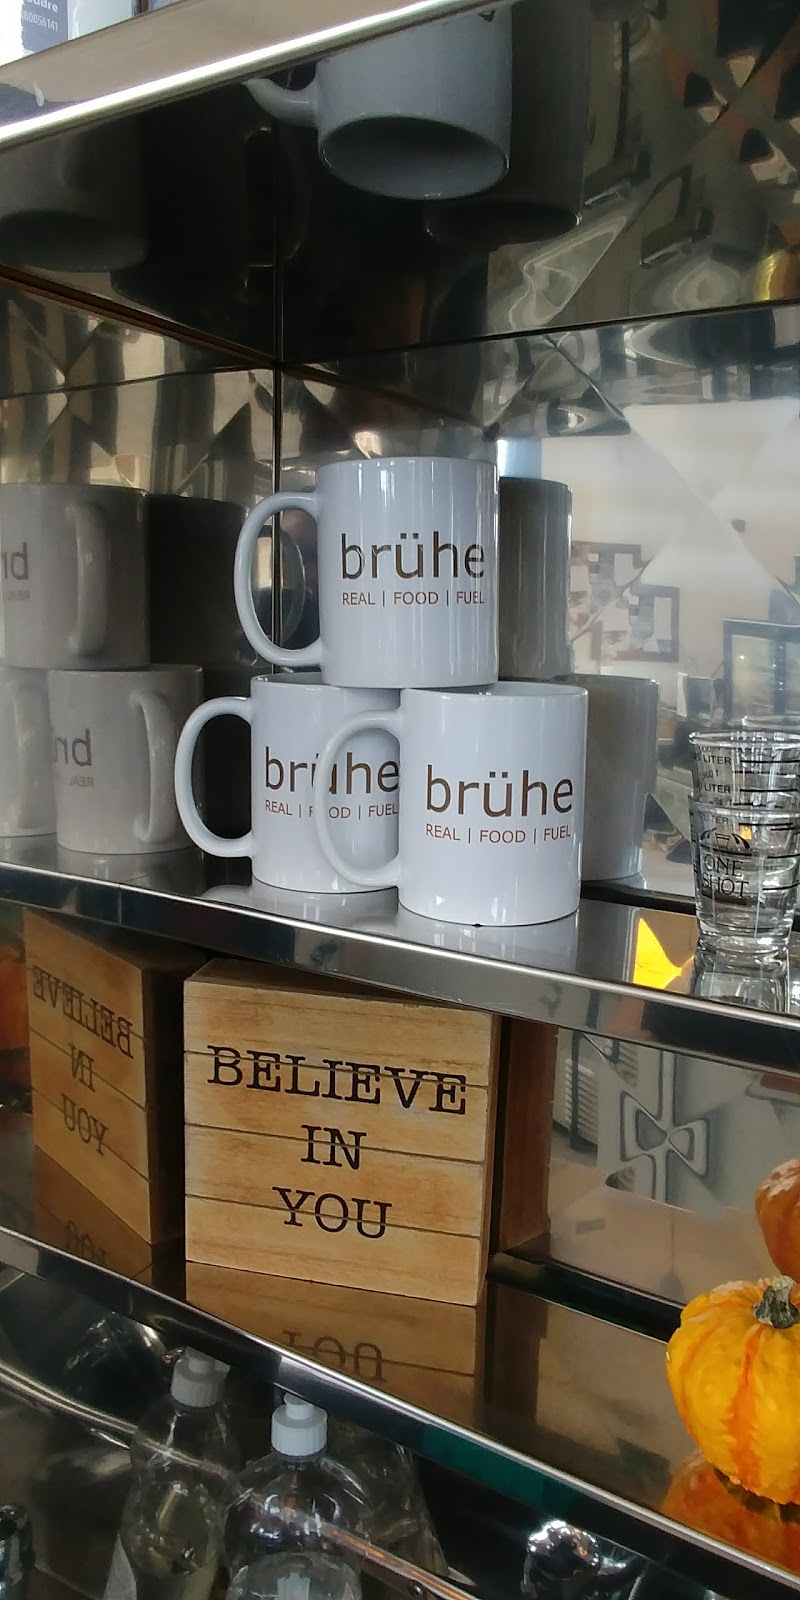 Bruhe Real Food Fuel | store | 1024 Bellevue Ave SE, Calgary, AB T2G 4L1, Canada | 4032626700 OR +1 403-262-6700